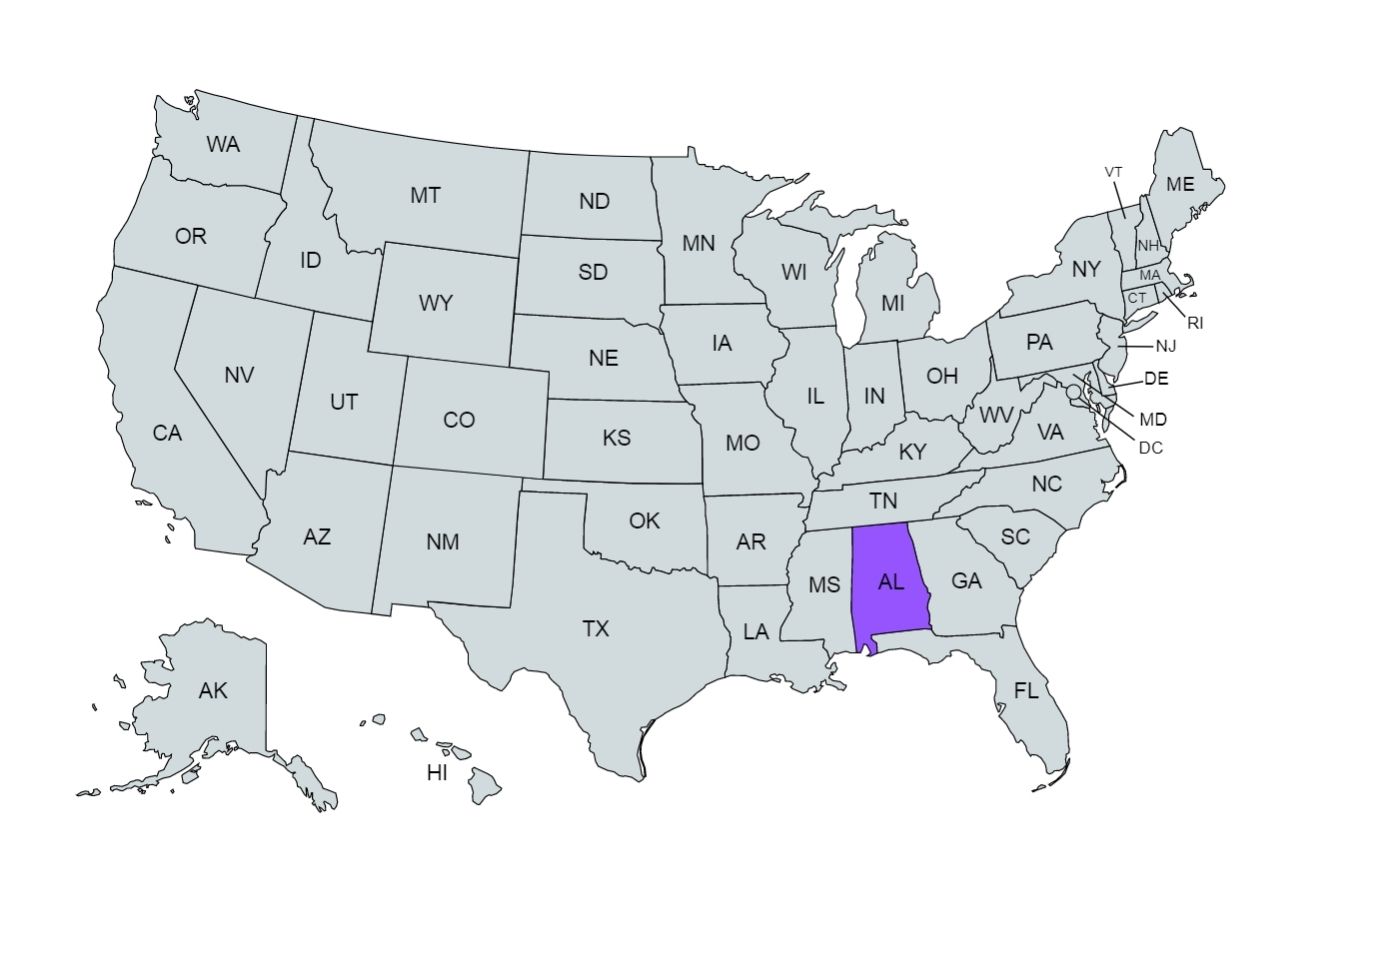 U.S.A map with the Alabama state marked in purple